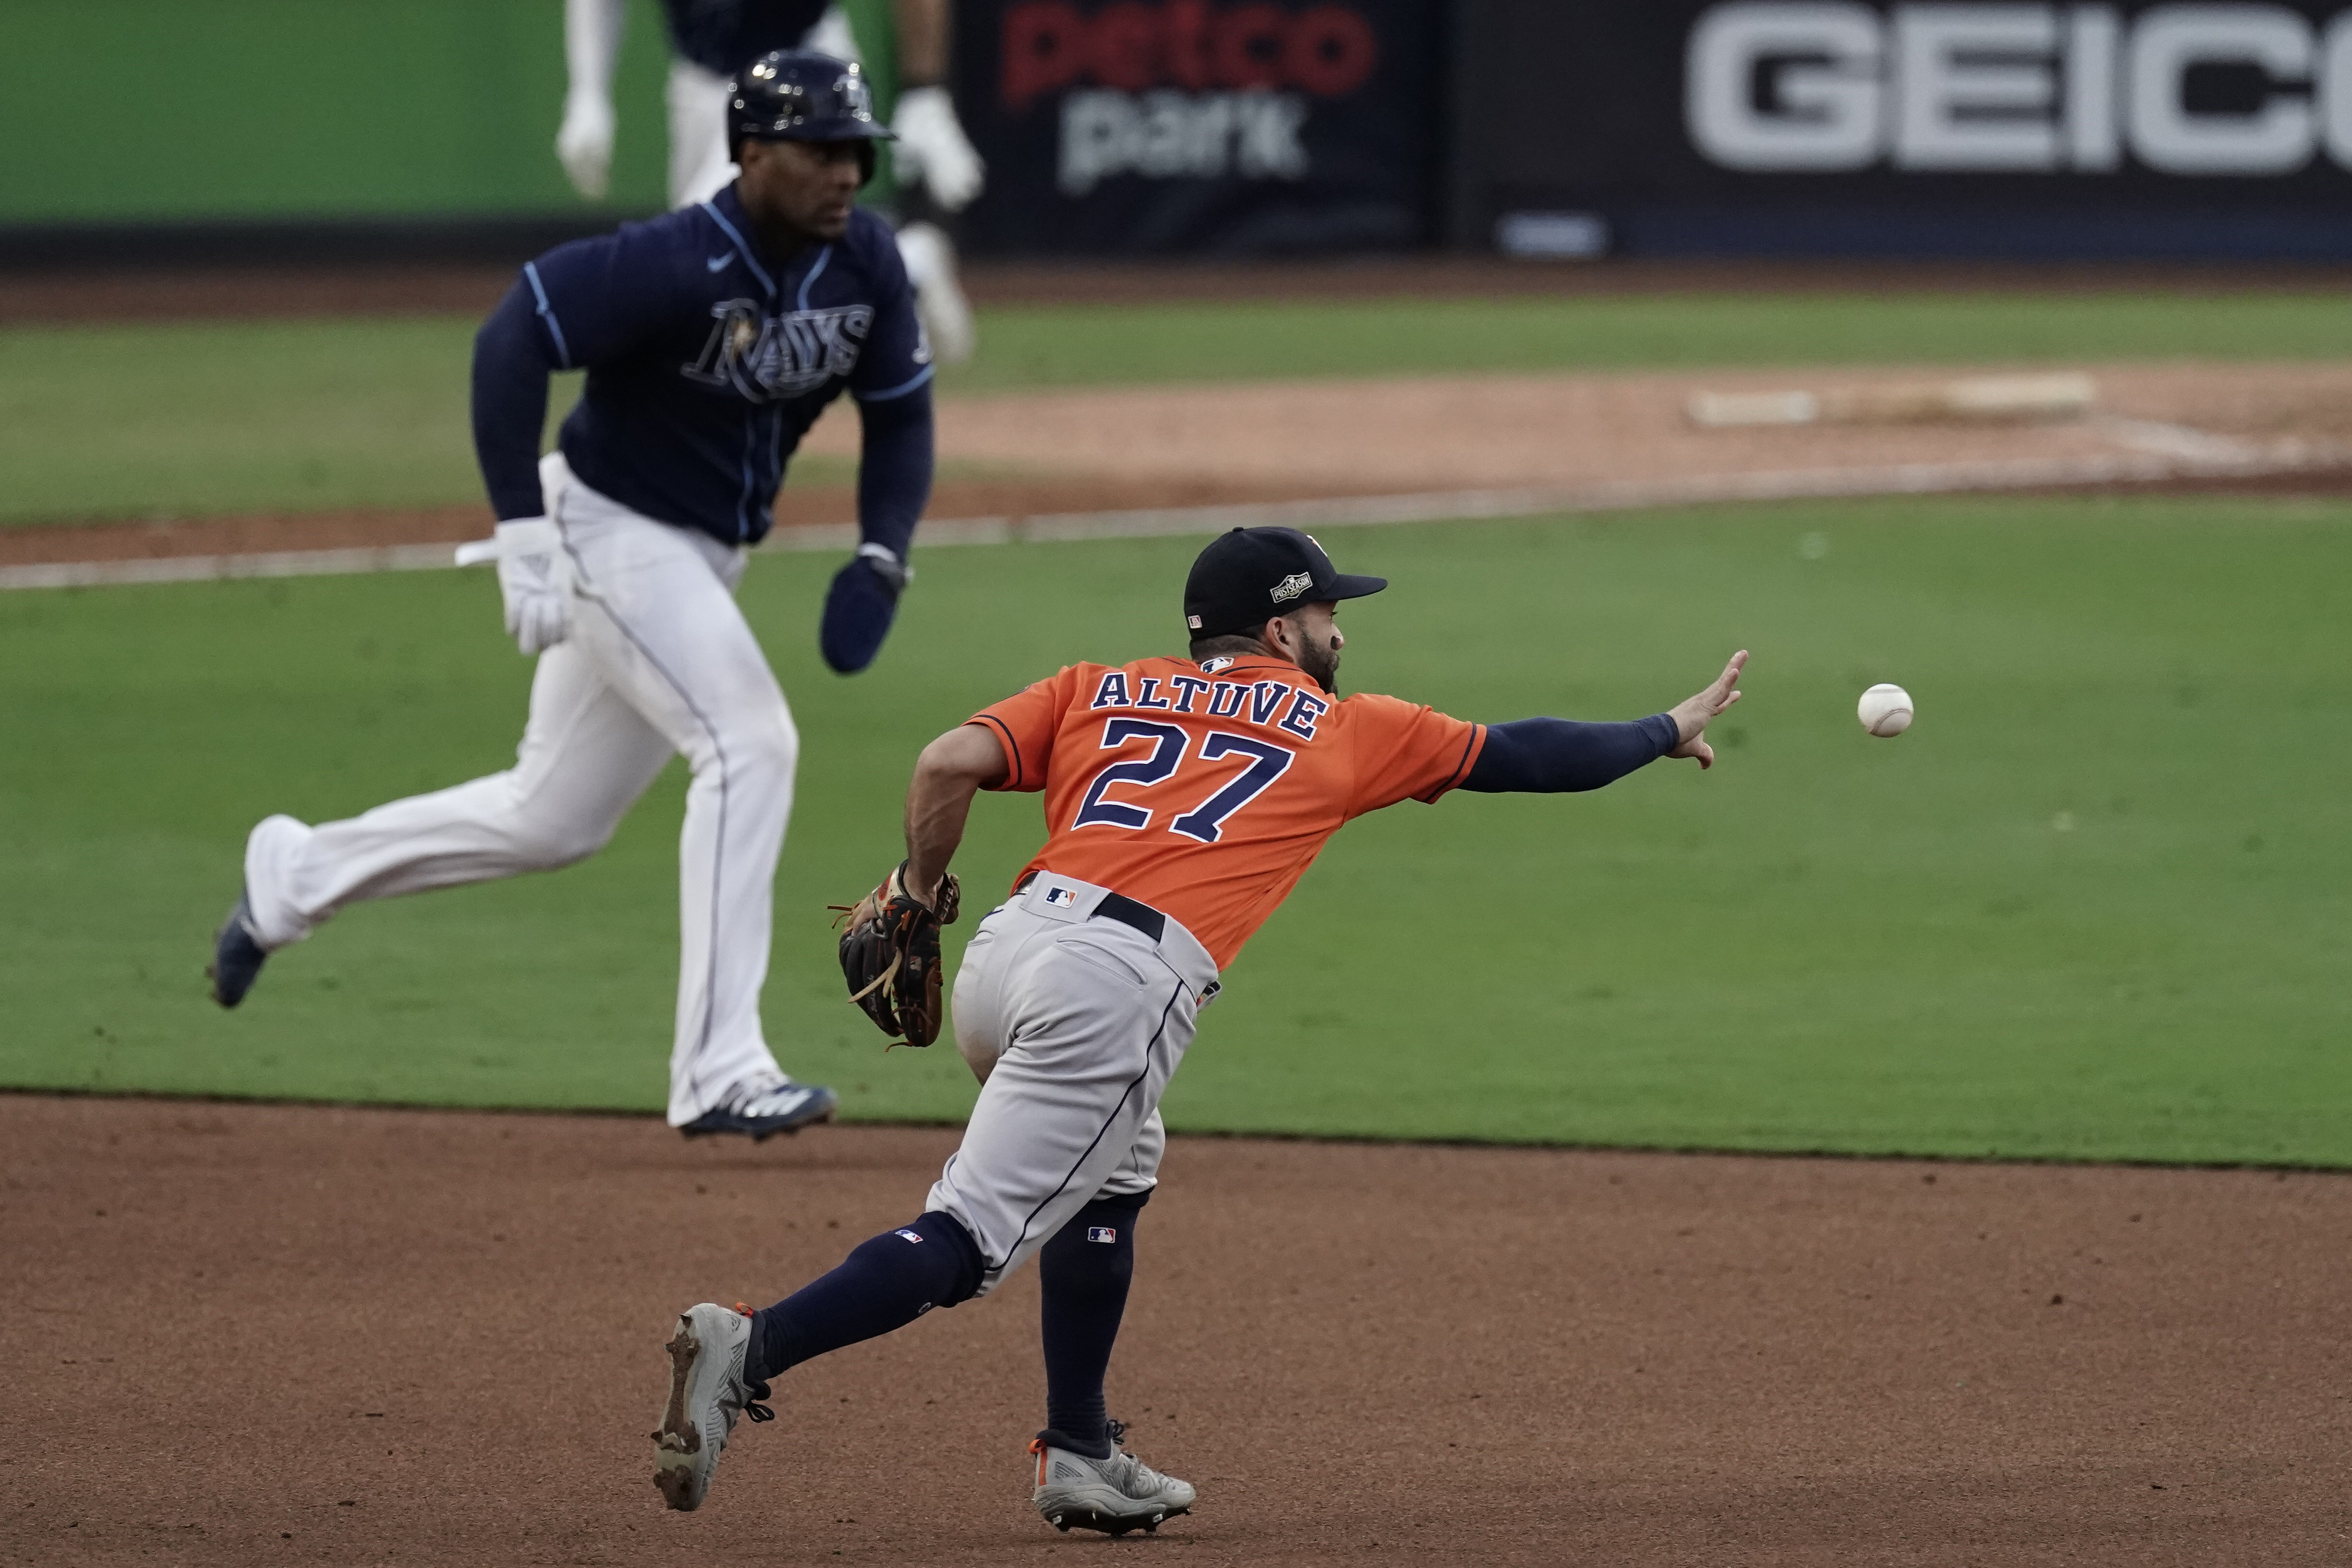 Astros vs. Rays live stream: TV channel, how to watch ALCS Game 7